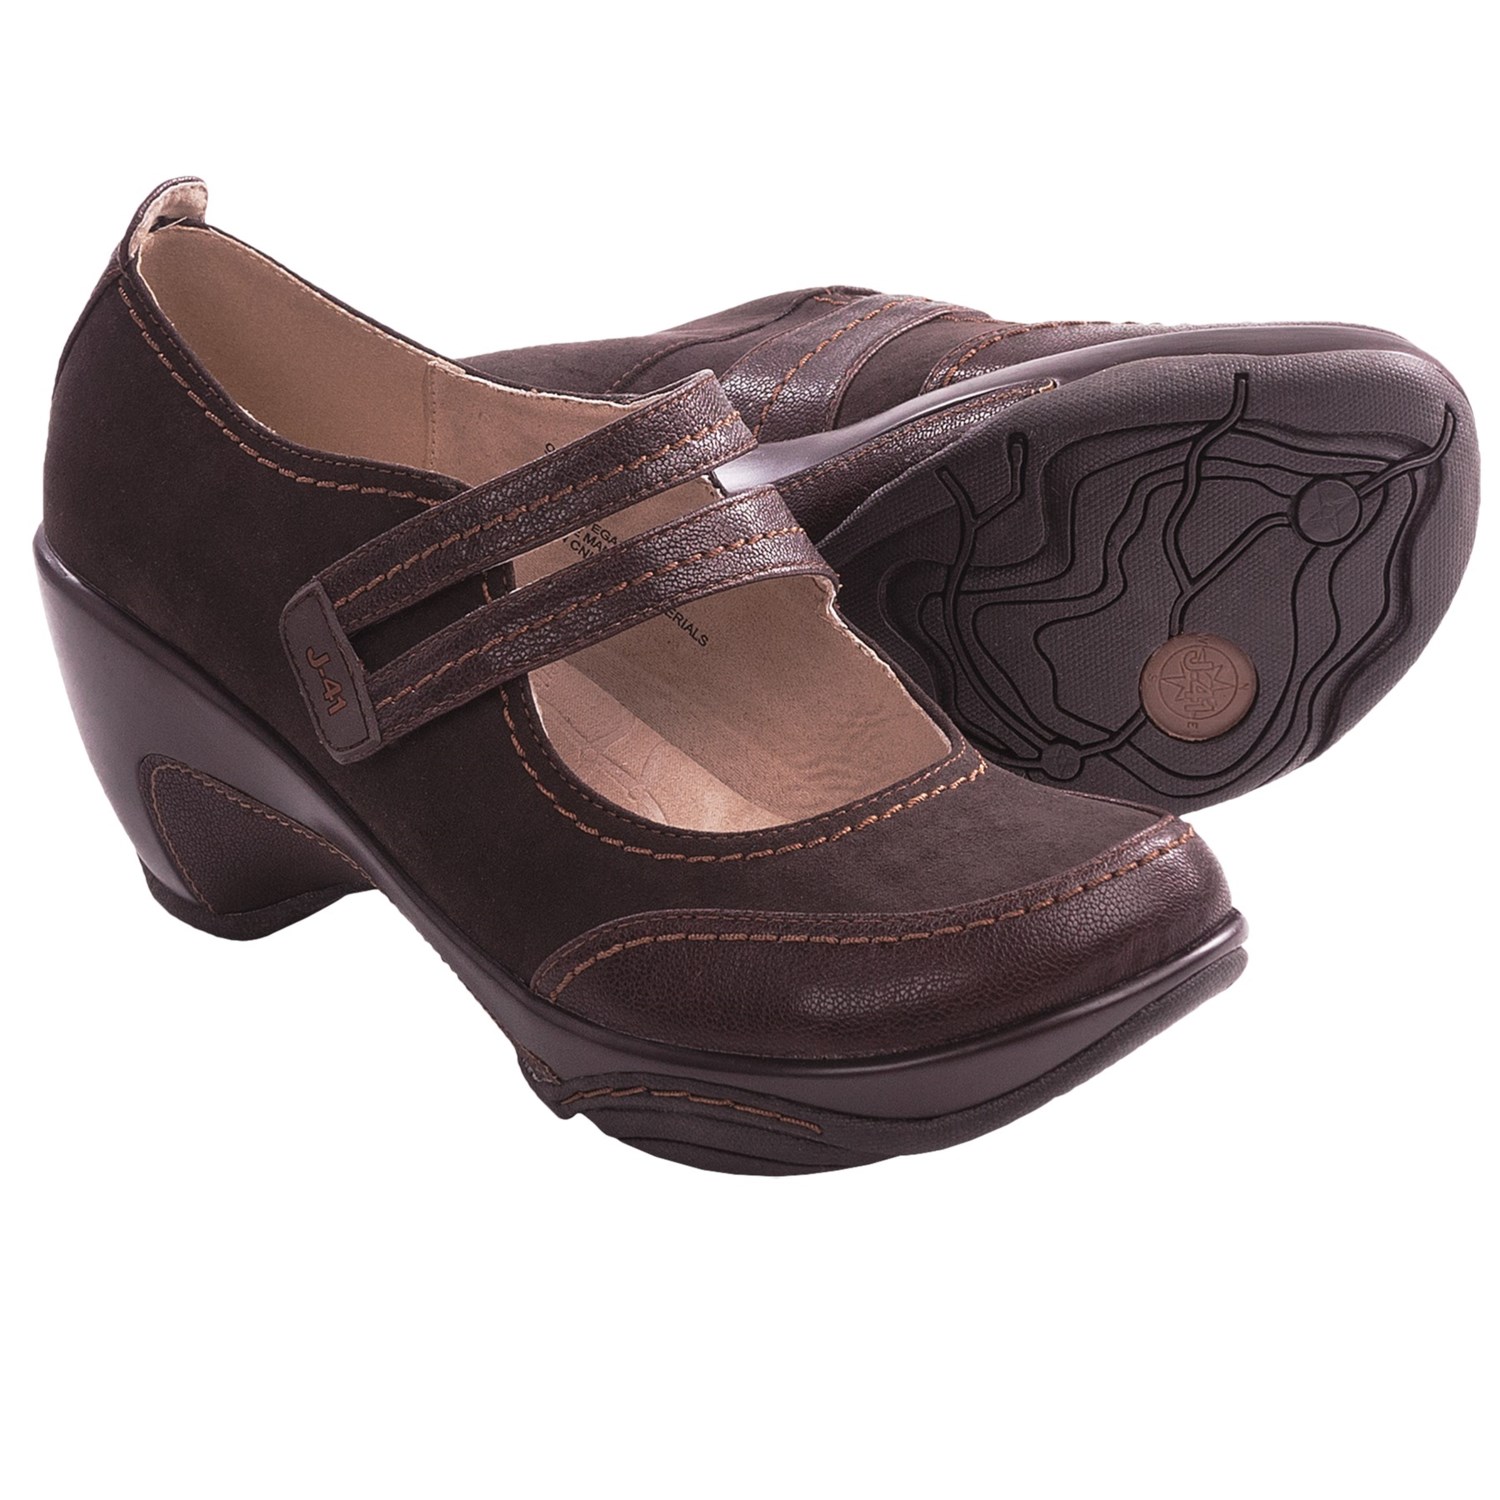 J41 Kyoto Shoes Leather (For Women) Save 34